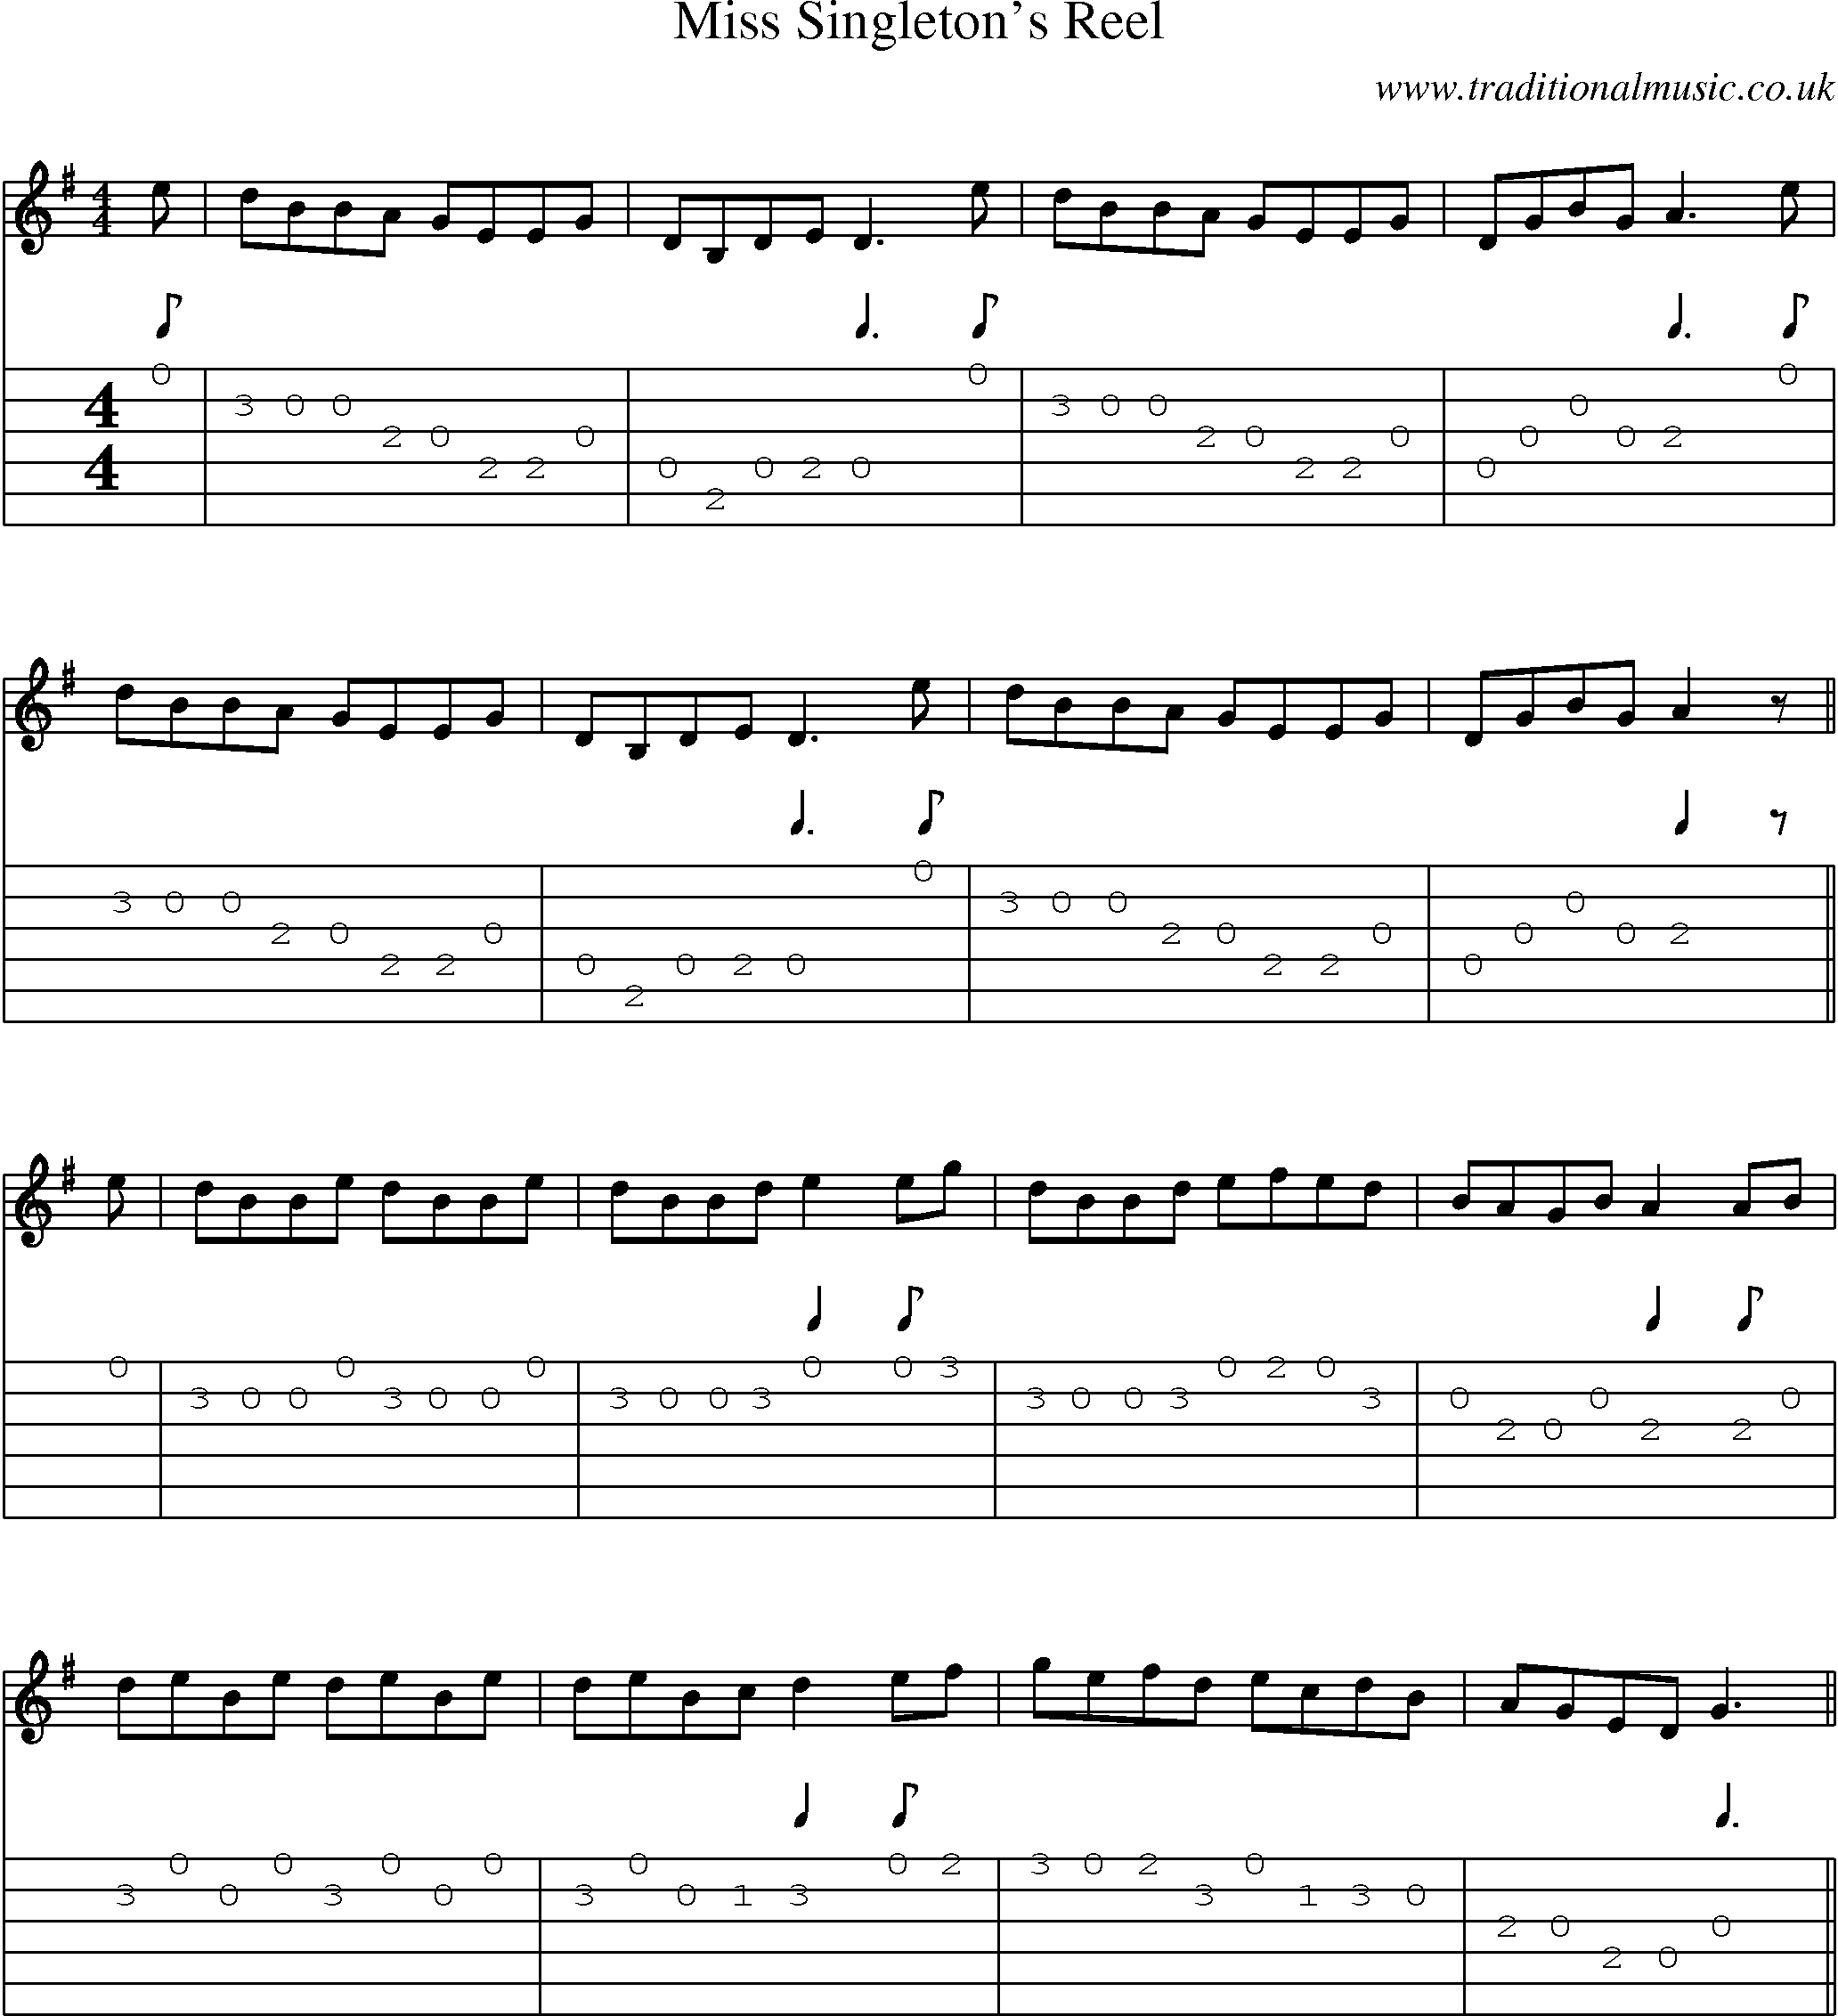 Music Score and Guitar Tabs for Miss Singletons Reel